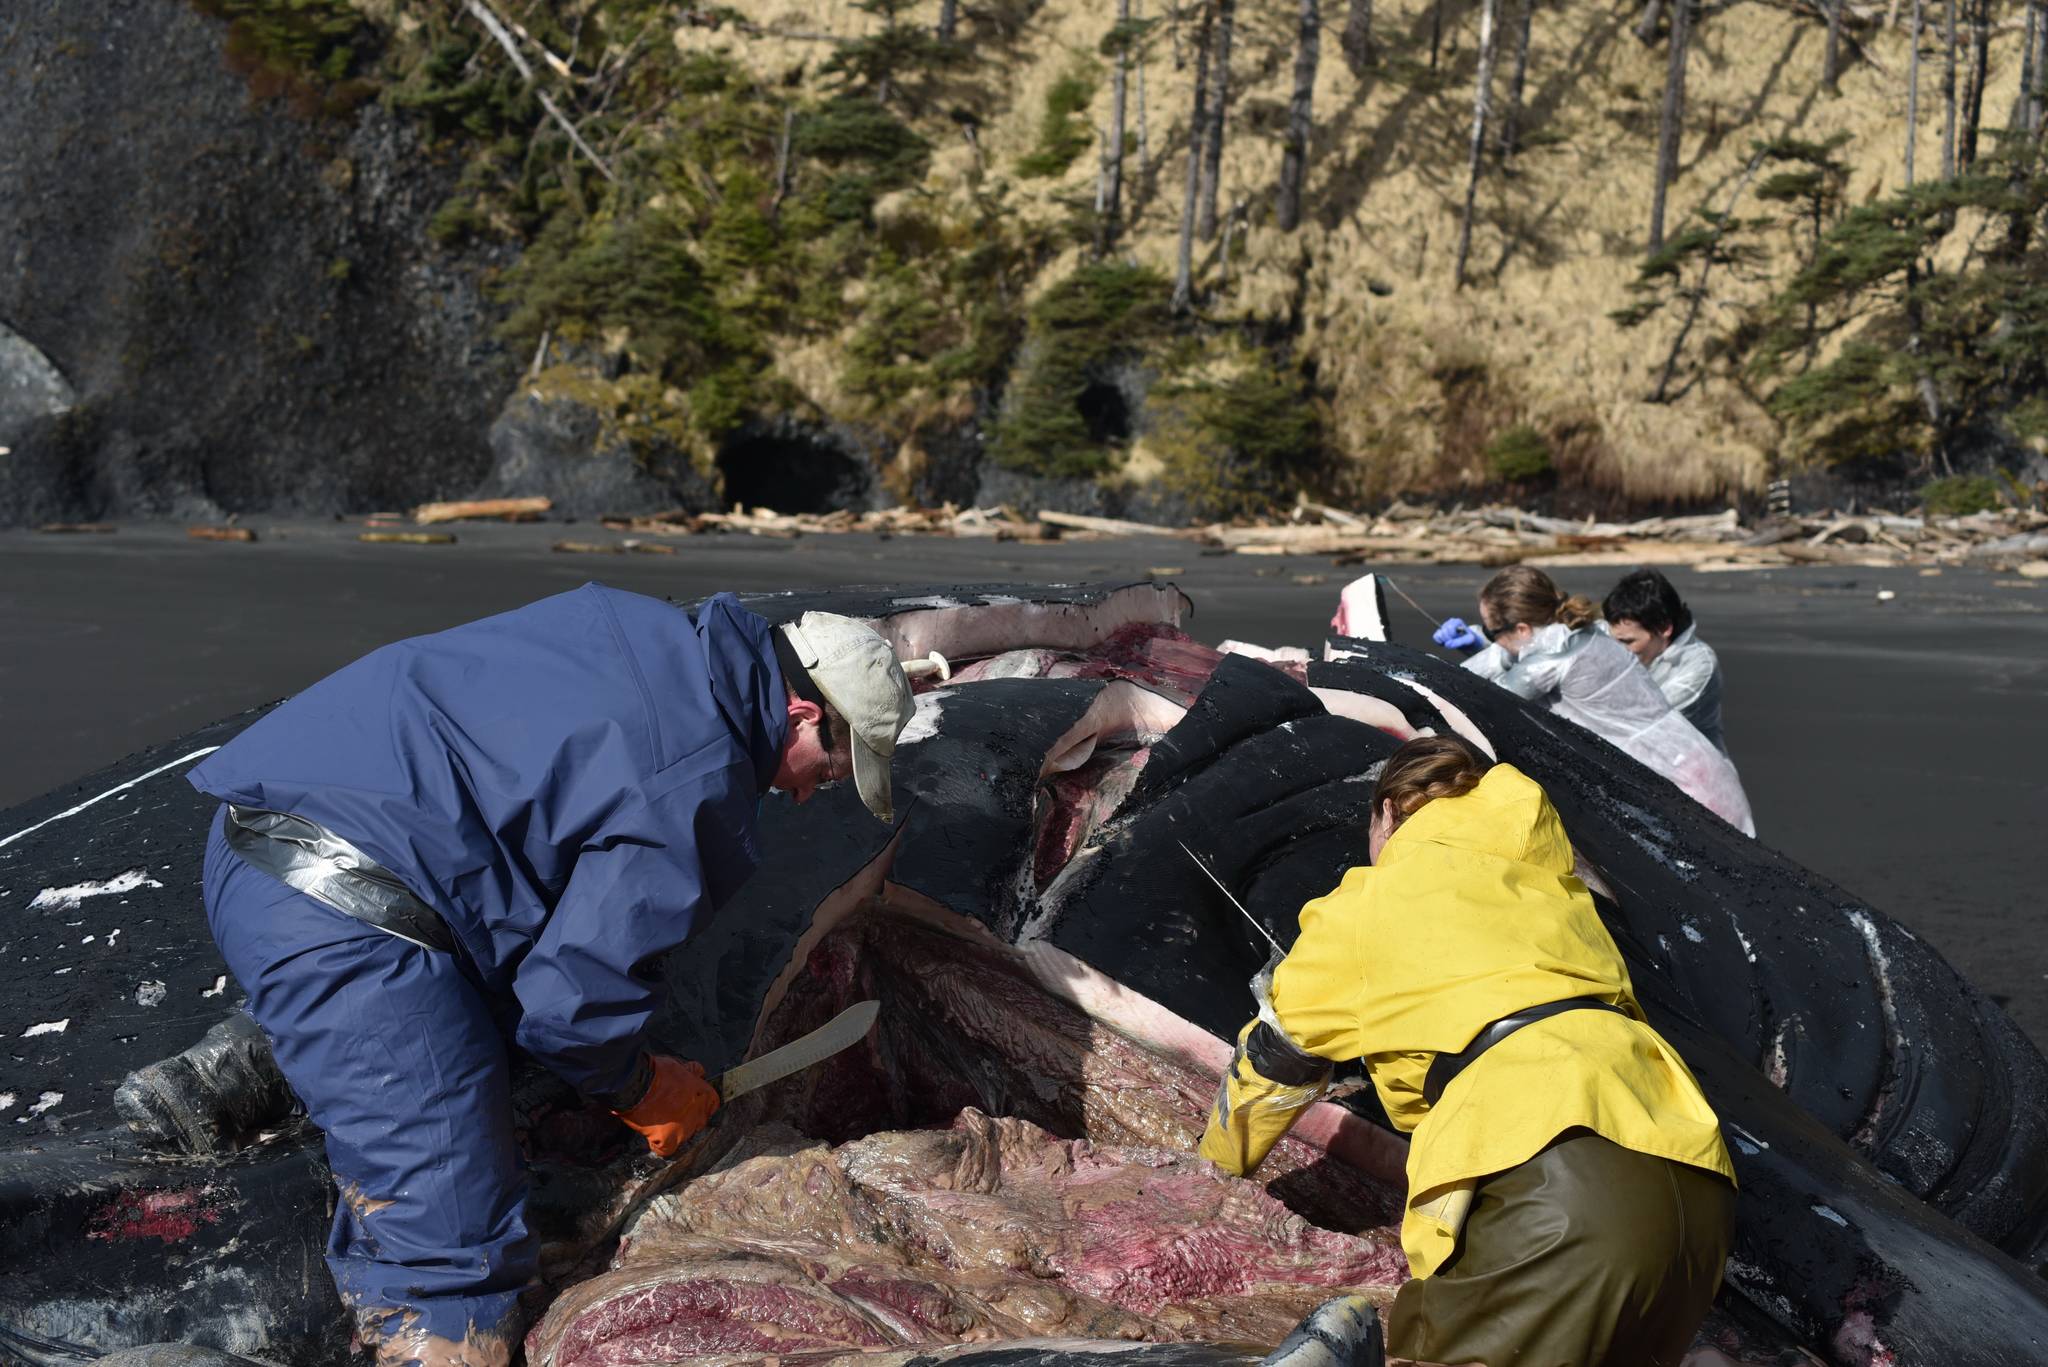 Volunteers with the Alaska Marine Mammal Stranding Network perform a necropsy on a beached humpback whale on Kuzof Island on Thursday, March 18, 2021. (Courtesy Photo / Alaska Marine Mammal Stranding Network)